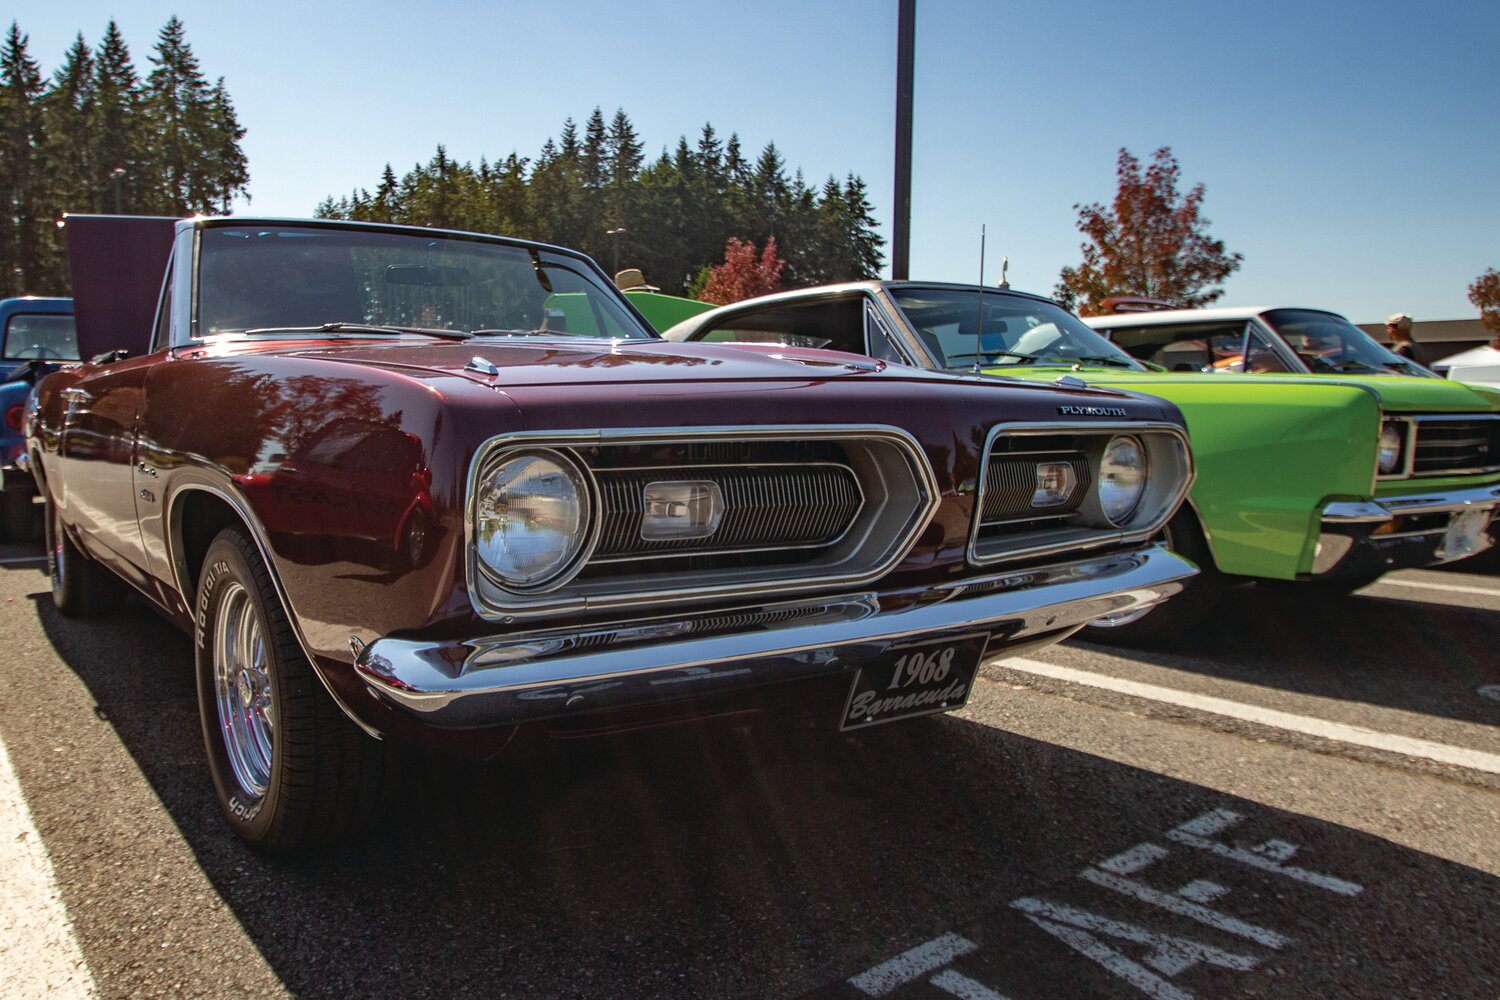 A 1968 Plymouth Barracuda is seen on Saturday, Sept. 9, at Yelm High School for the Yelm FFA Alumni Association car show.